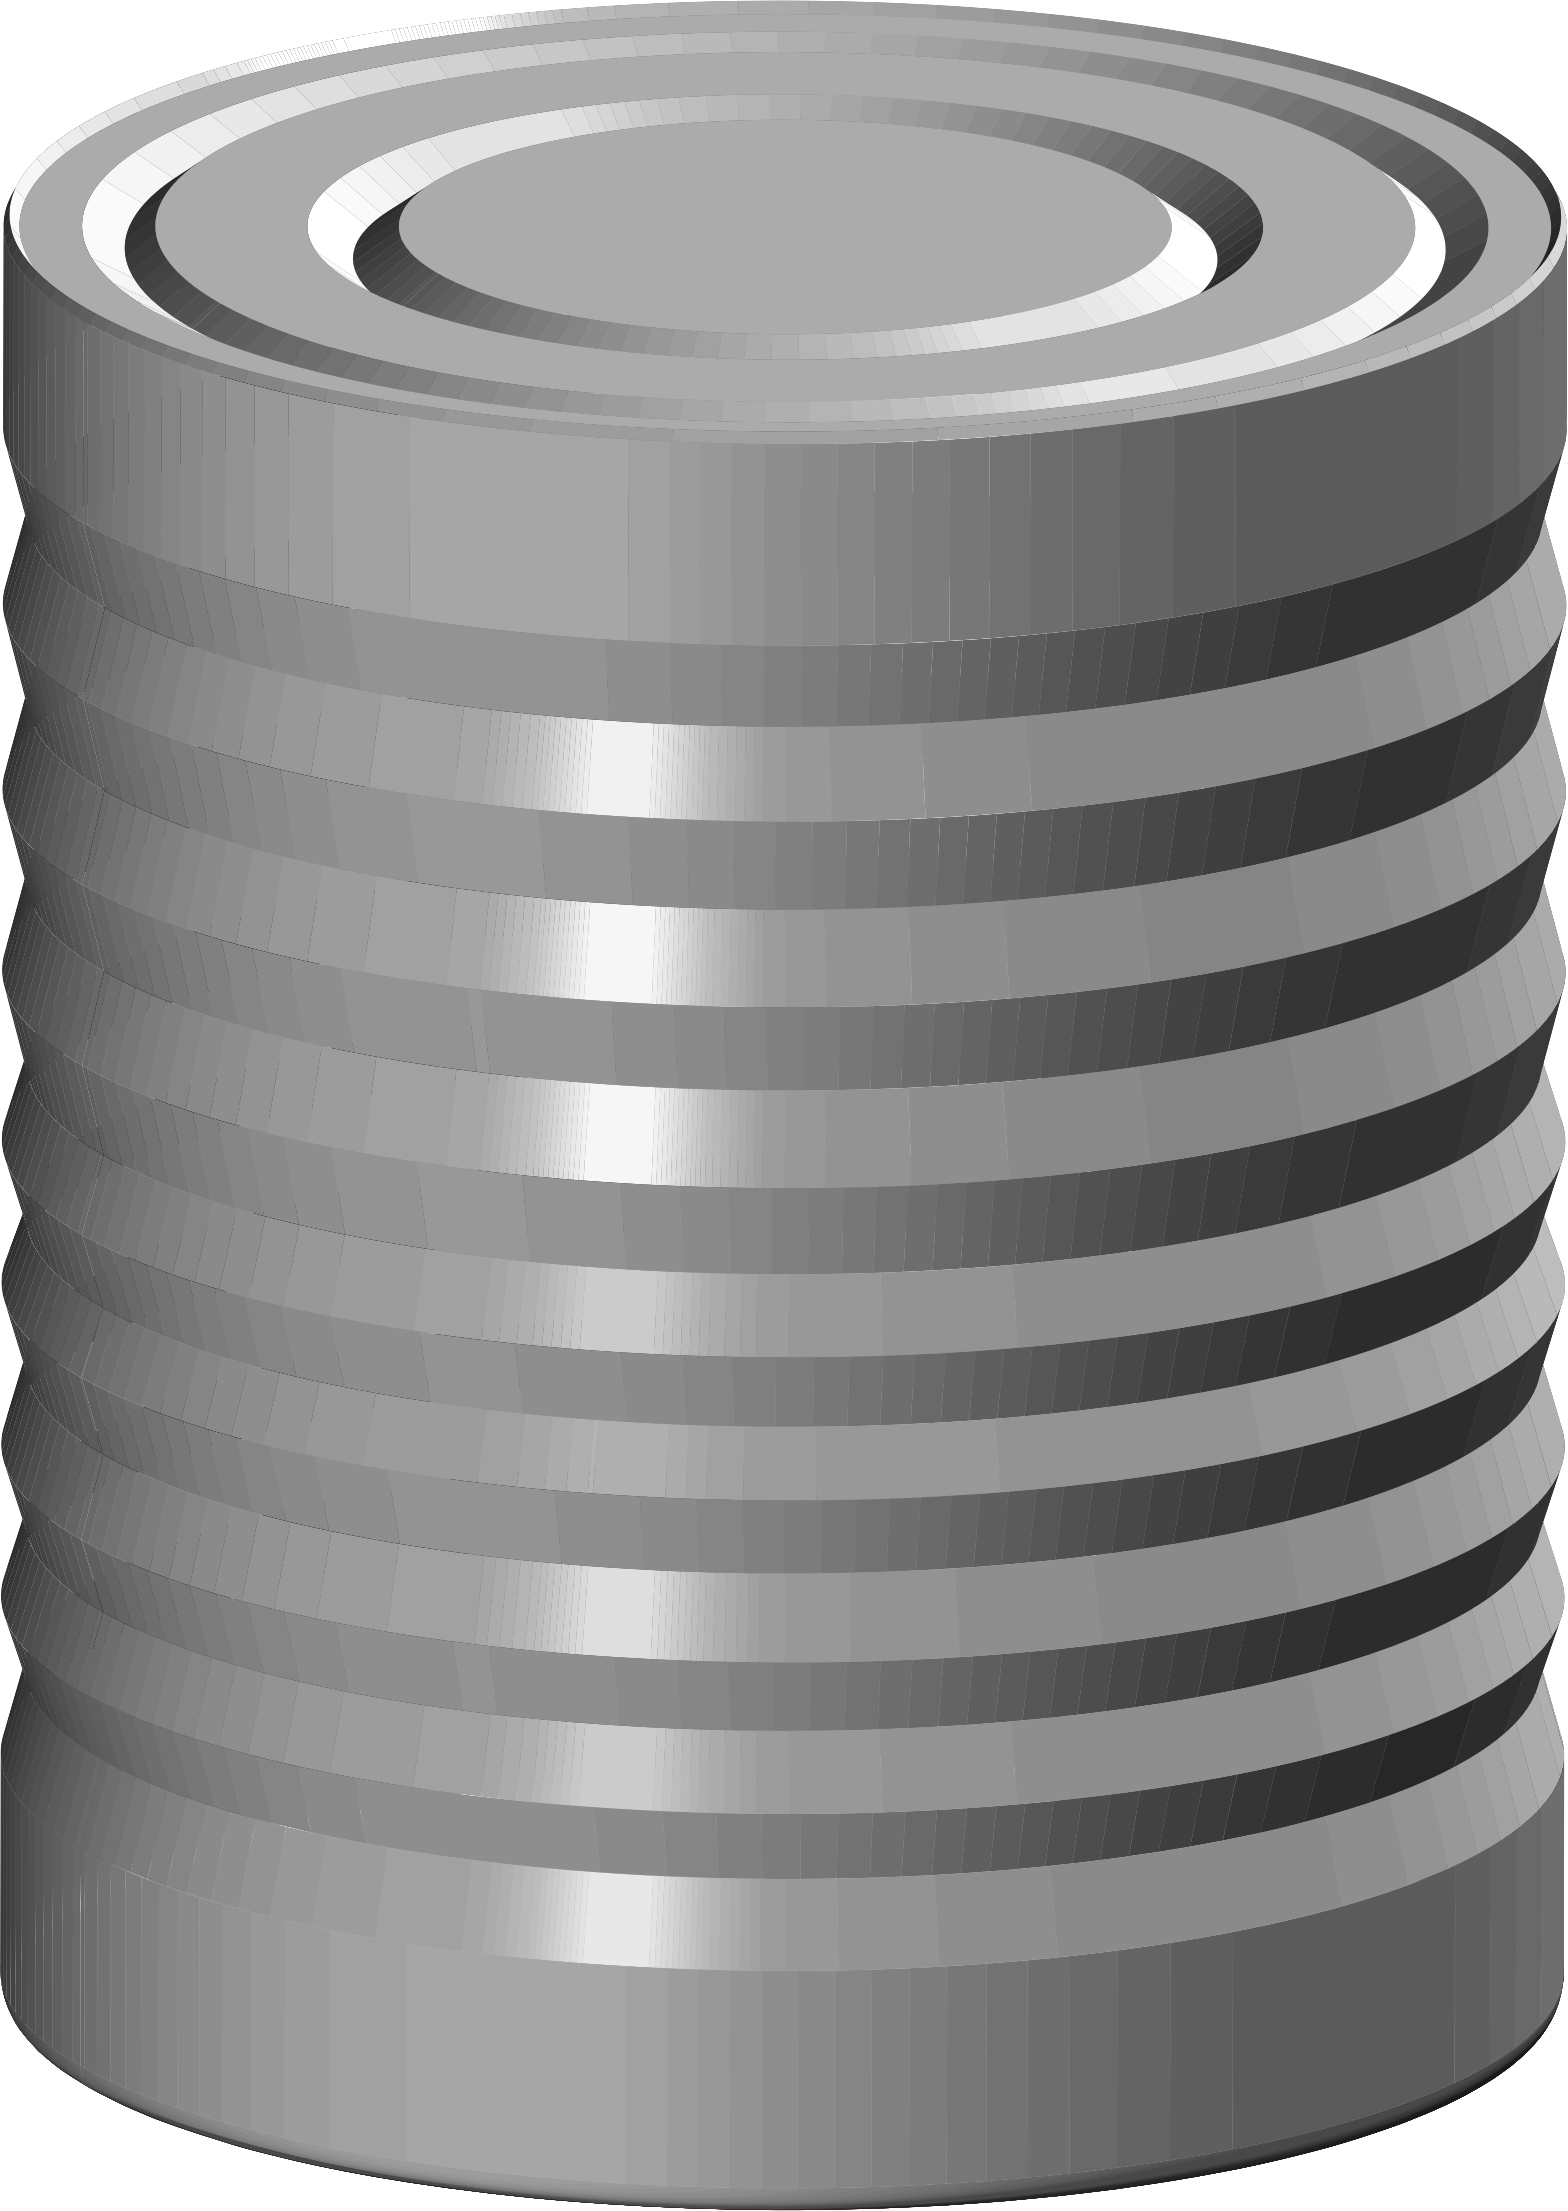 Free Tin Can Cliparts, Download Free Clip Art, Free Clip Art.